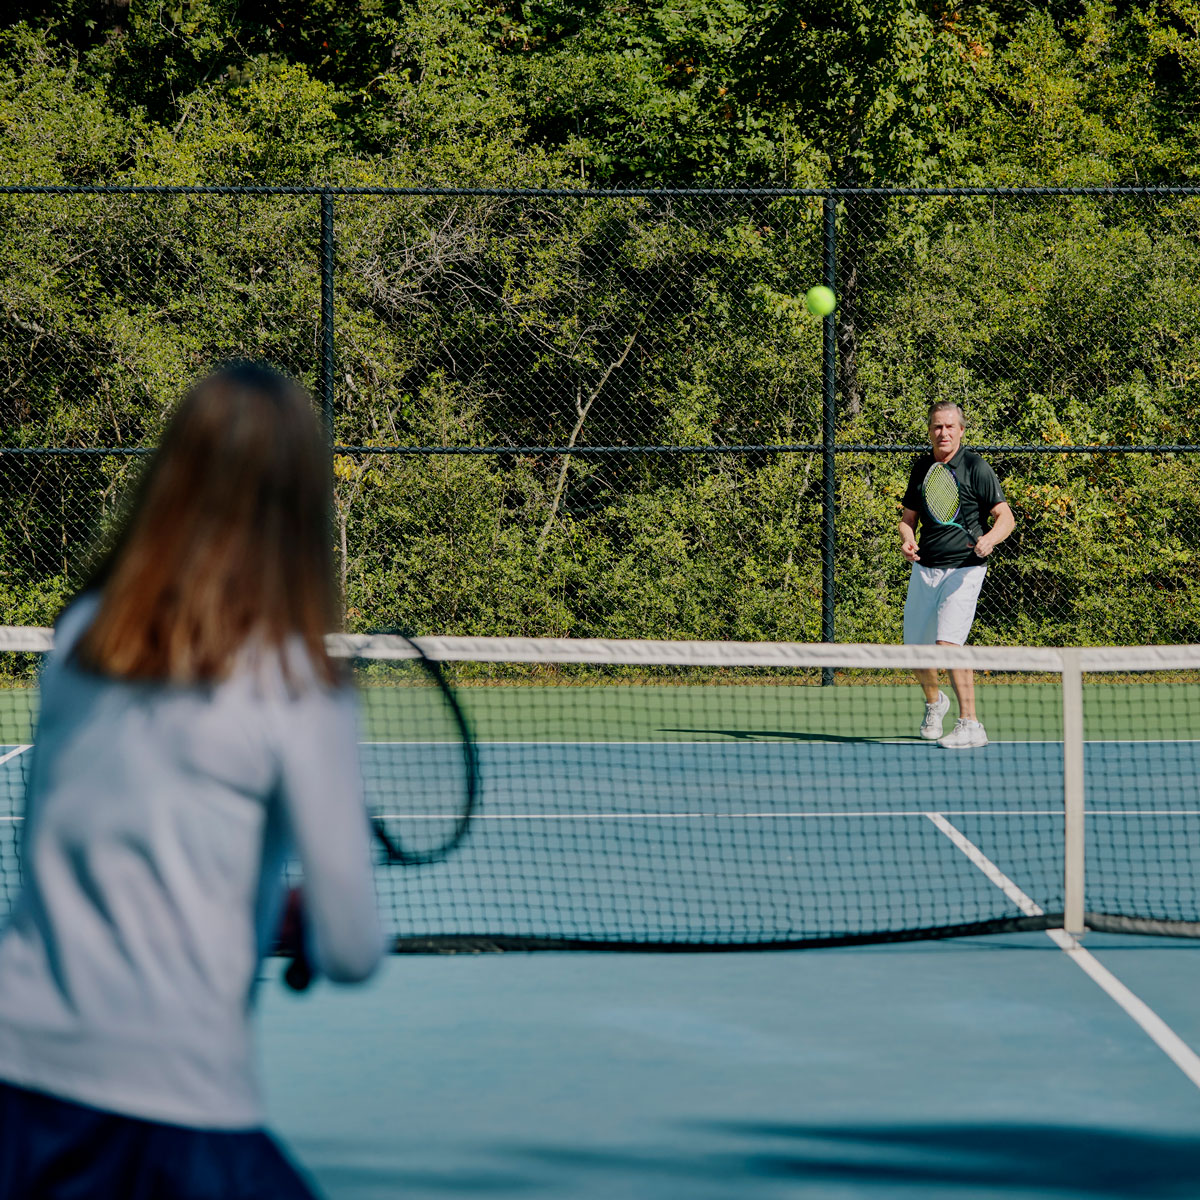 There's something magical about the crisp sound of the ball meeting the racket amidst the serene backdrop of nature. Residents love our courts for a good tennis match amongst family or friends! 🎾
#thewoodlandshills